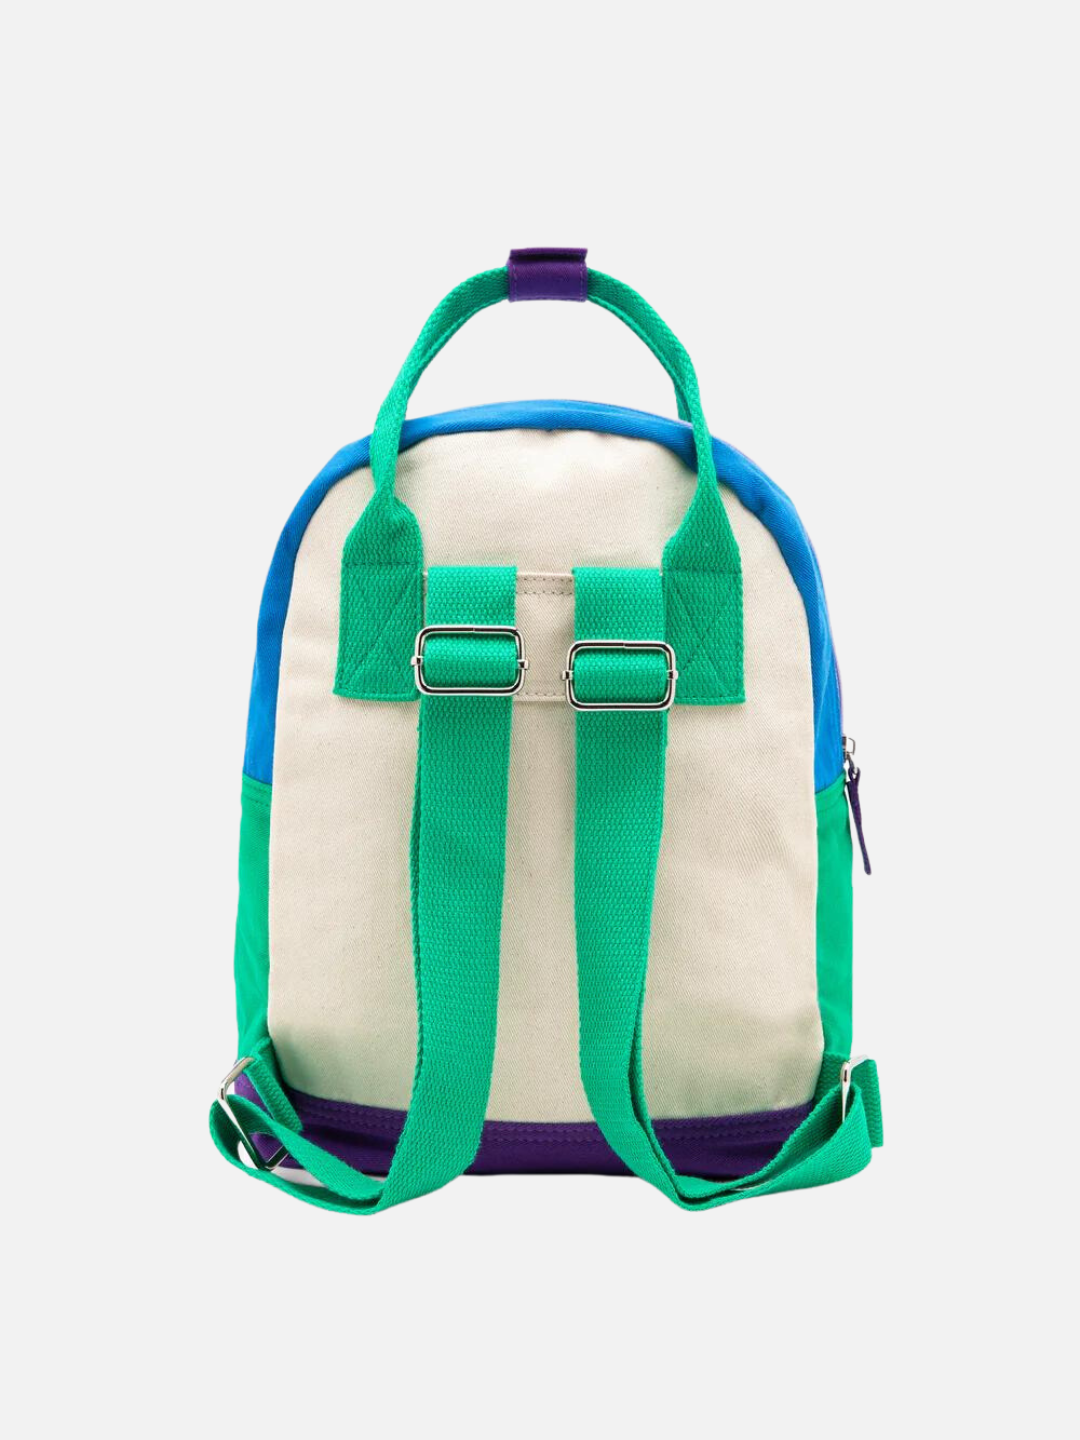 Banana Haven | Rear view of a colorblock backpack with green handles and straps, purple base, blue top and a cream backing